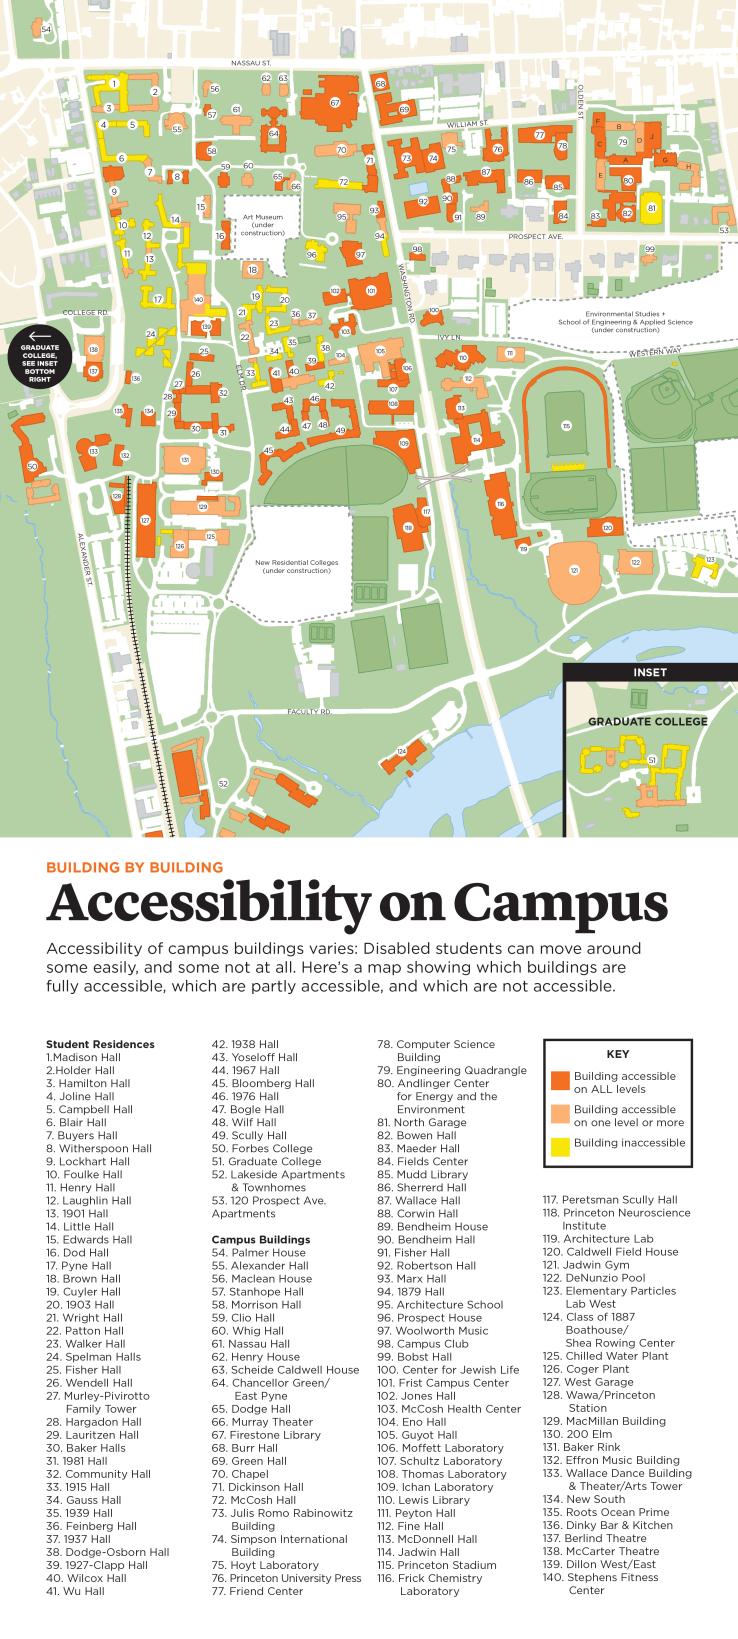 This is a map of Princeton's campus with buildings marked that are and are not fully accessible.